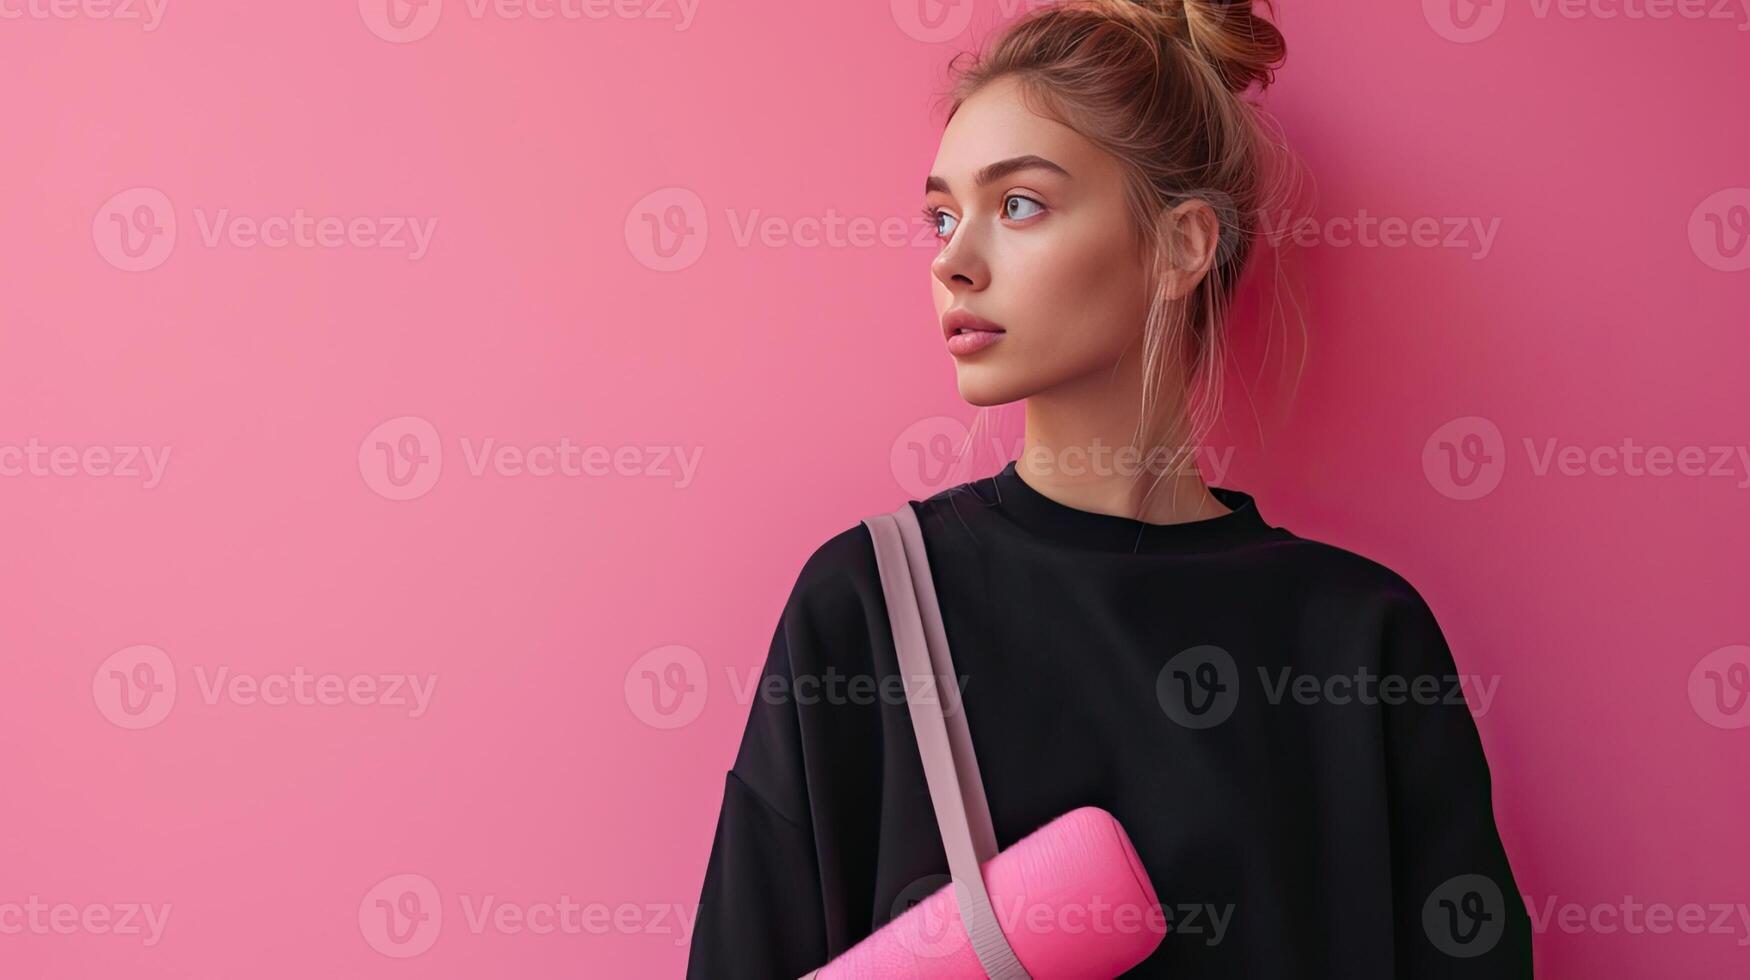 AI Generated a woman with blond hair styled in a casual bun, effortlessly showcasing a plain black crewneck sweatshirt with no wrinkles, her demeanor exuding confidence as she carries a rolled-up pink photo